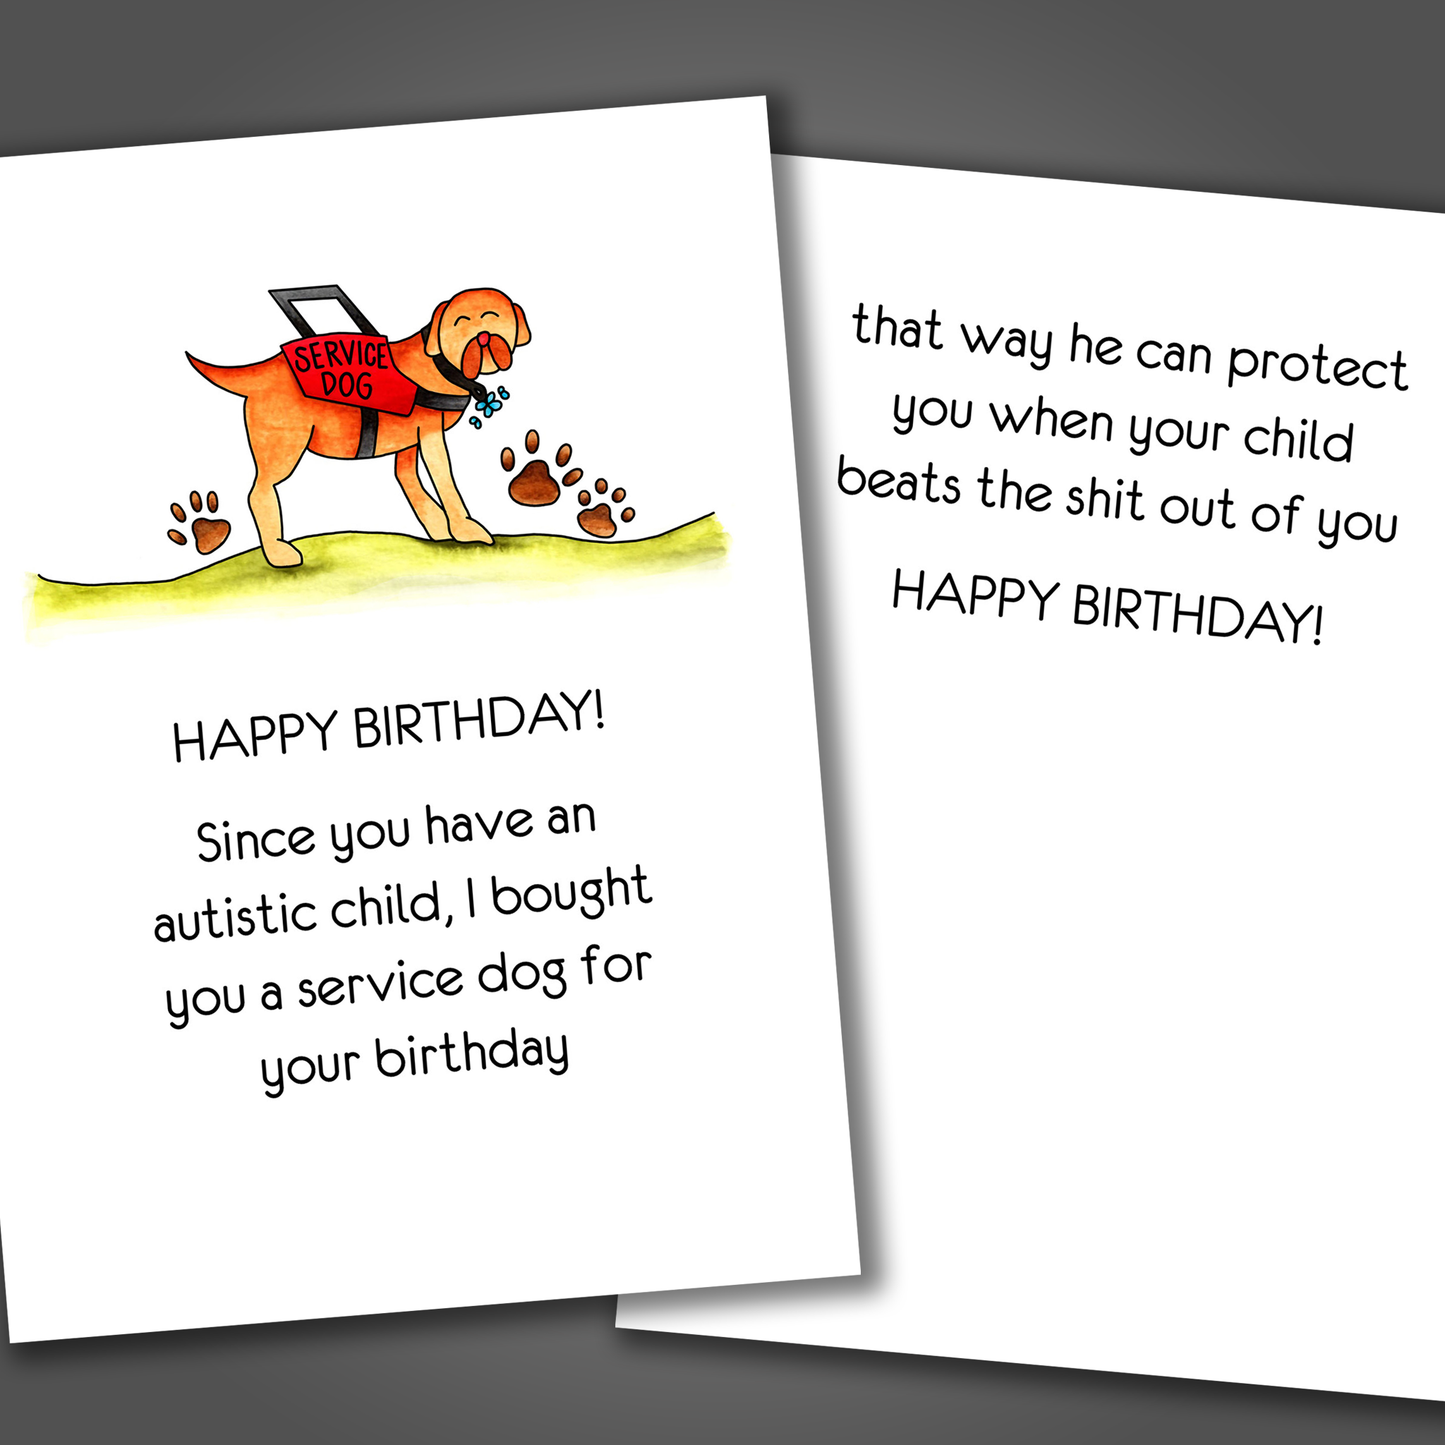 Funny happy birthday card with service dog drawn on the front of the card. Inside of the card is a funny joke inside that ends with happy birthday!